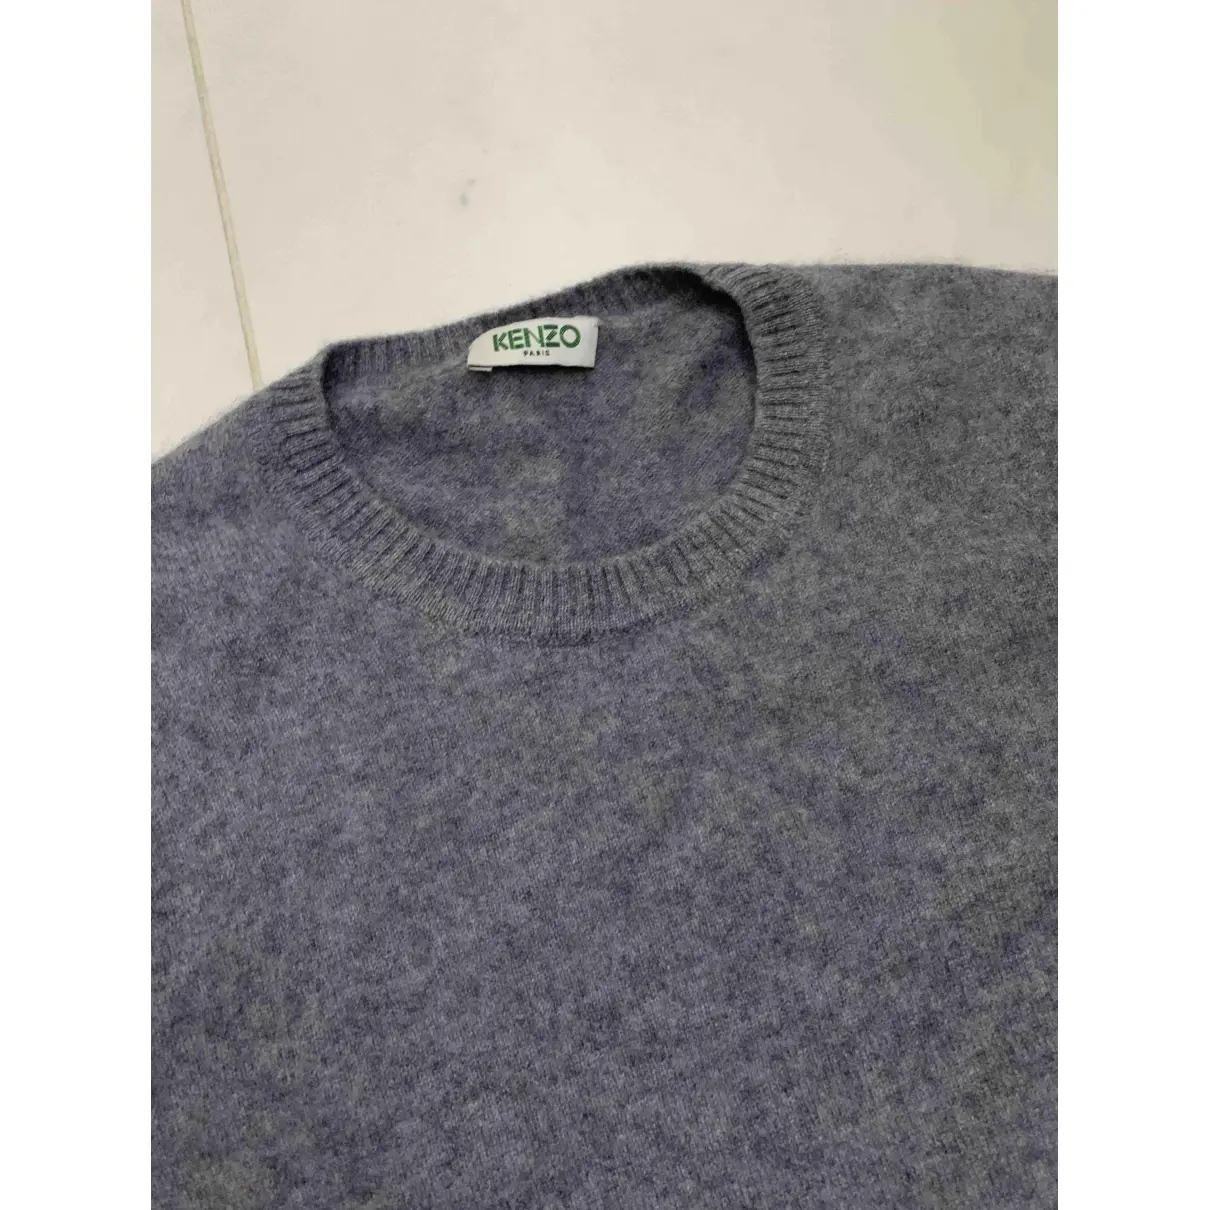 Buy Kenzo Cashmere pull online